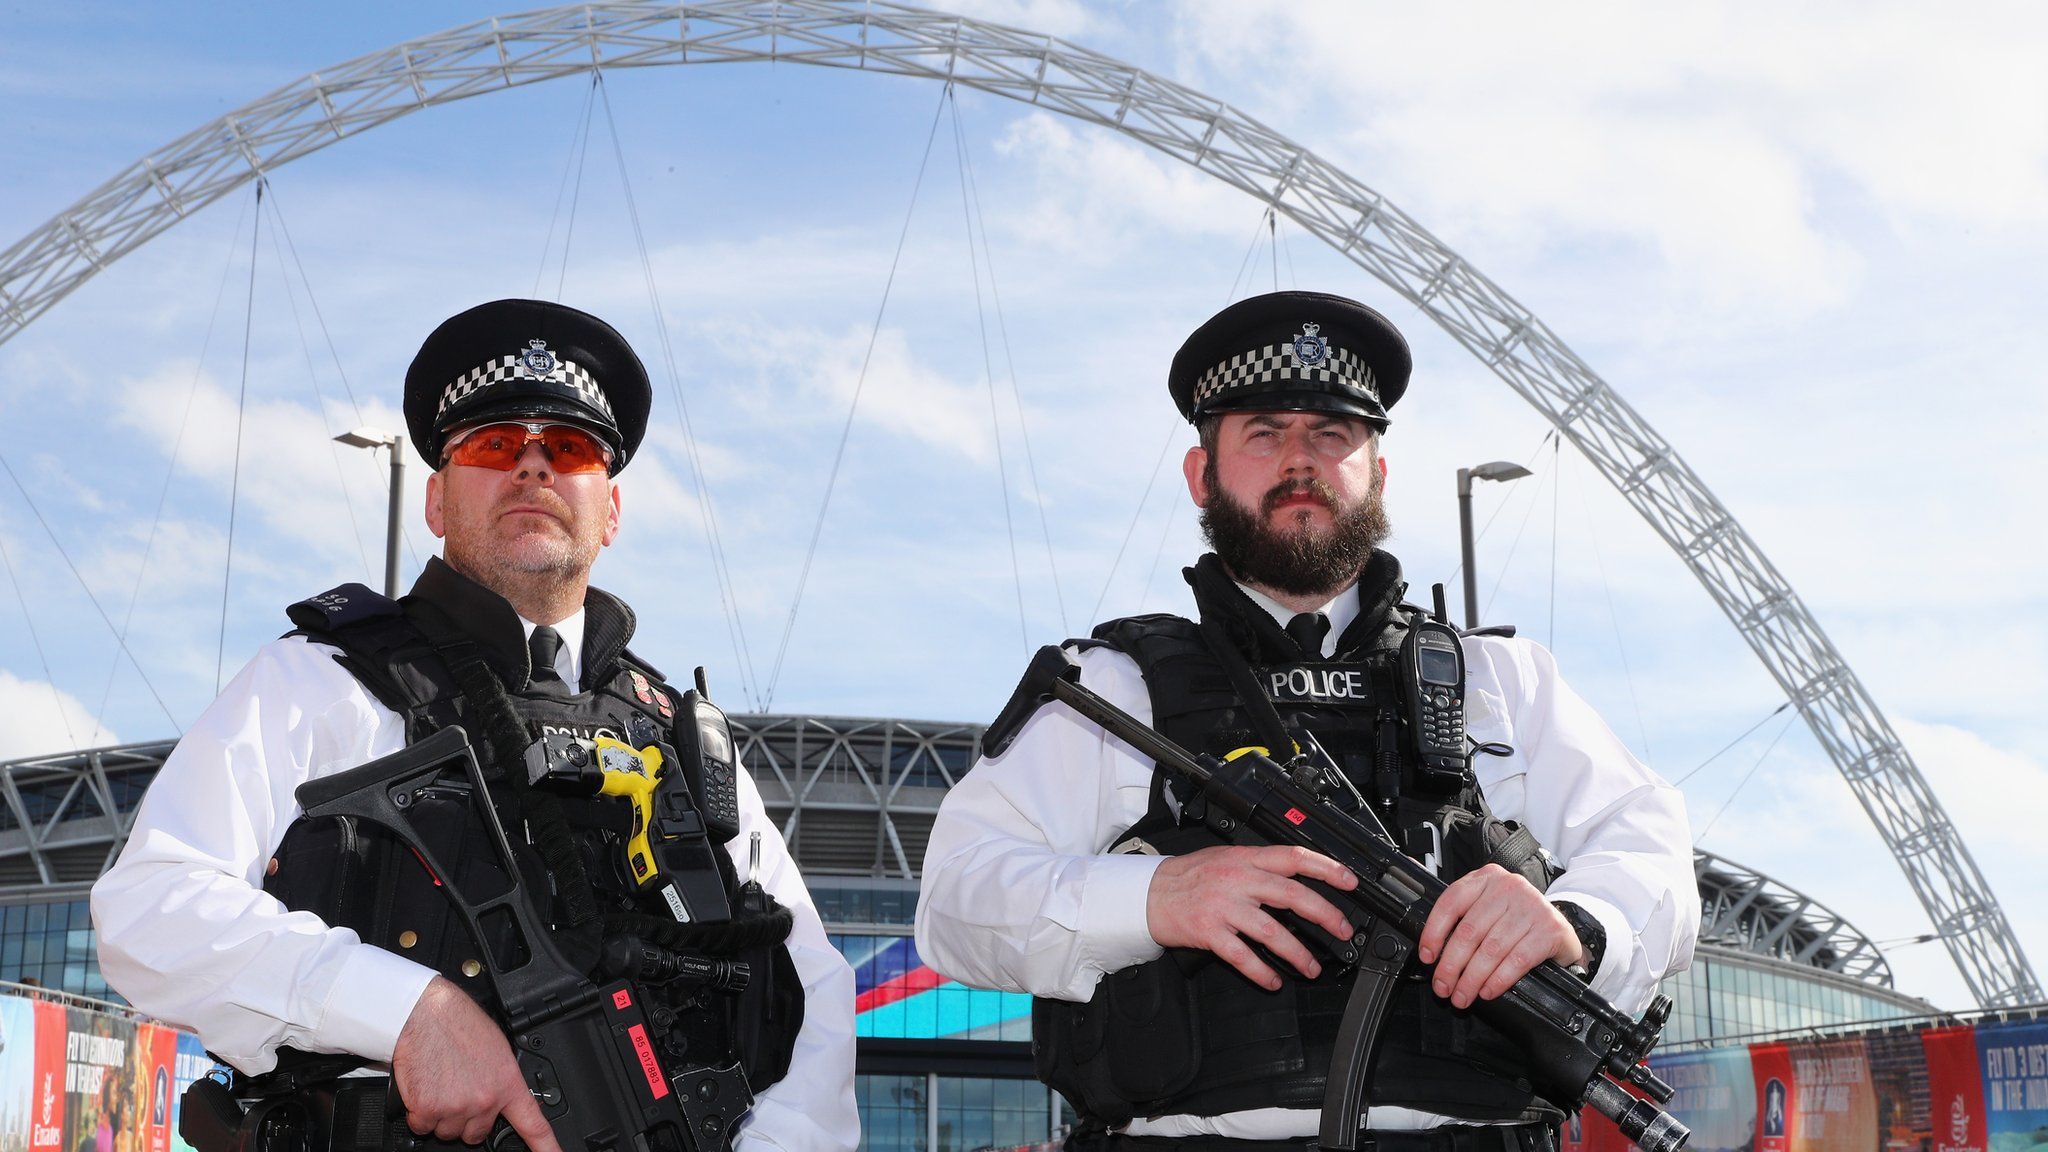 Two police officers outside Wembley